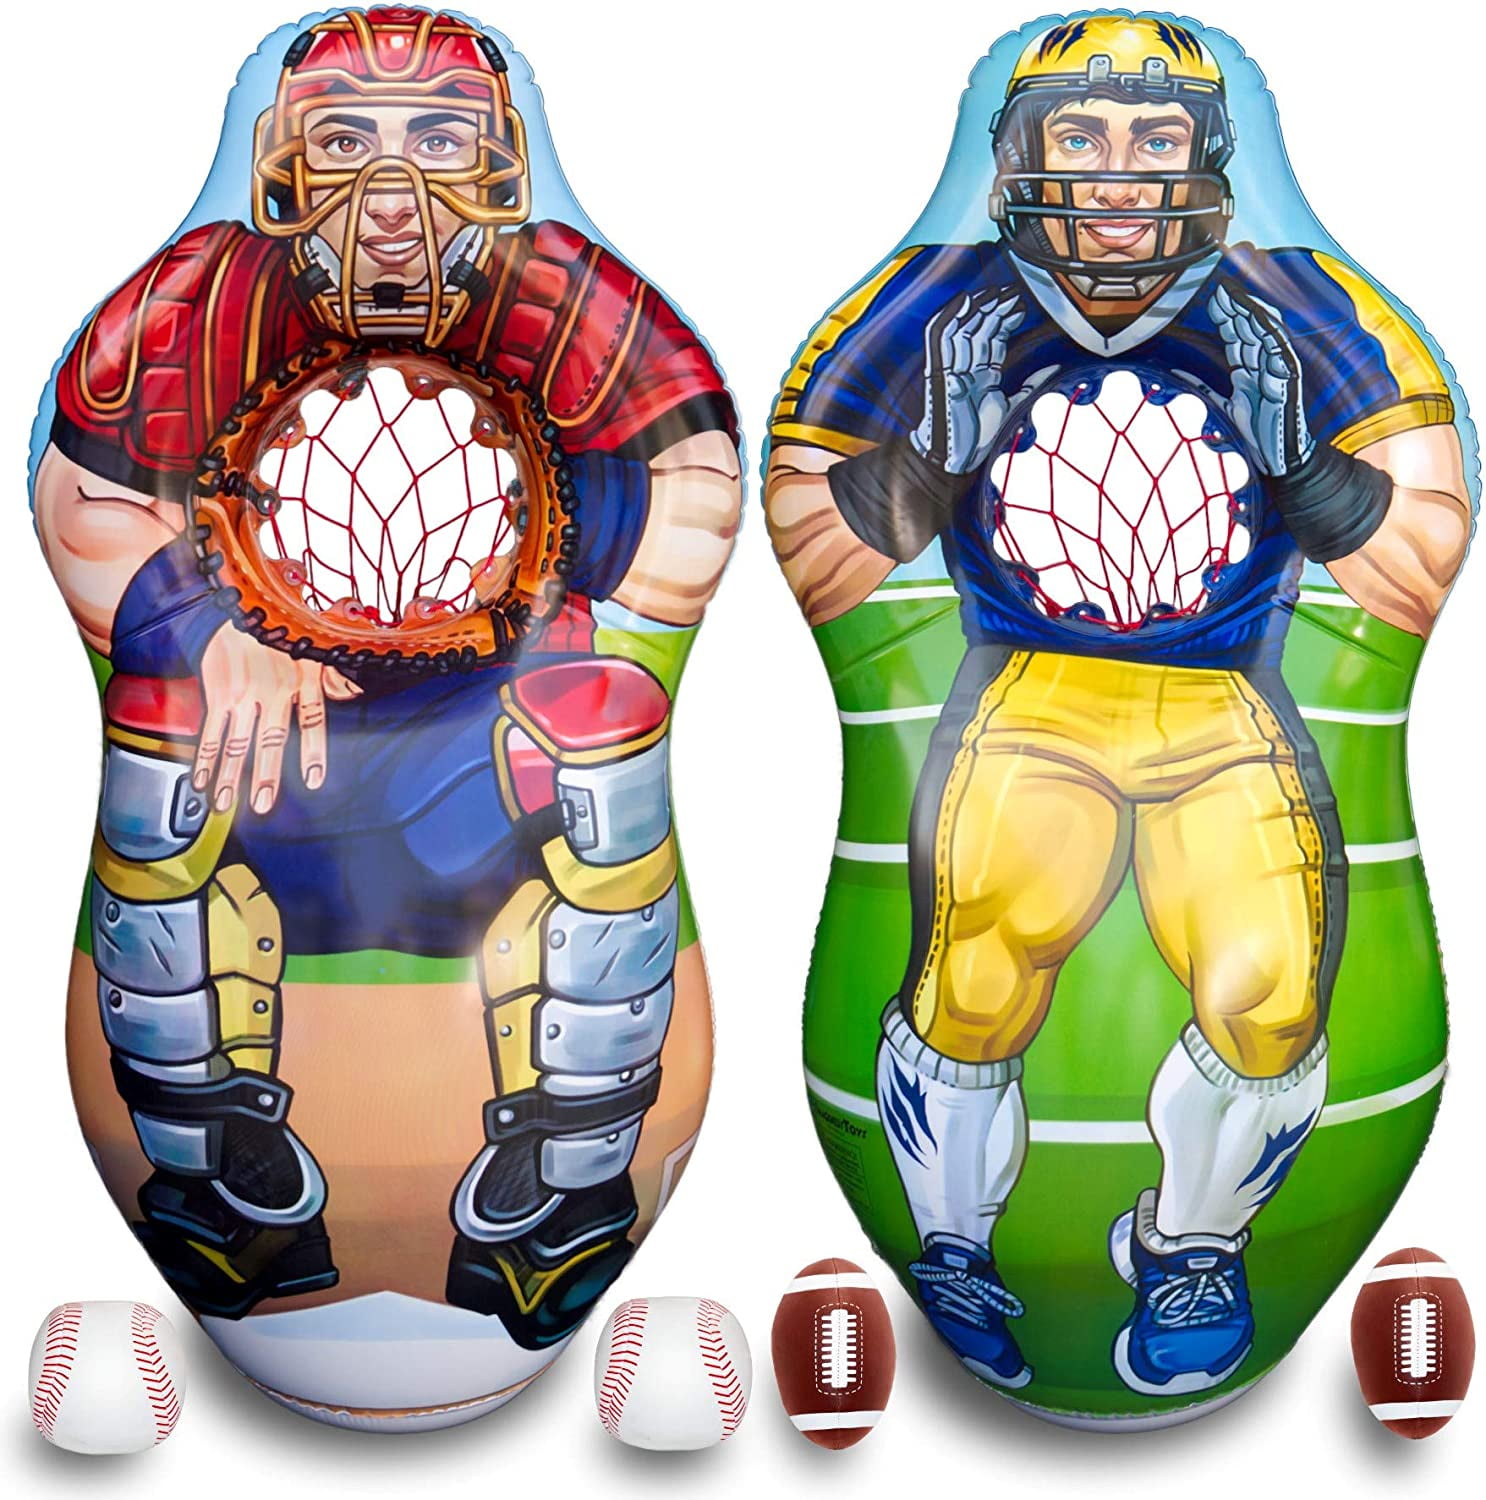 Sports Toys Gear Kid Toy Gifts Inflatable Football Toss Target Party Game